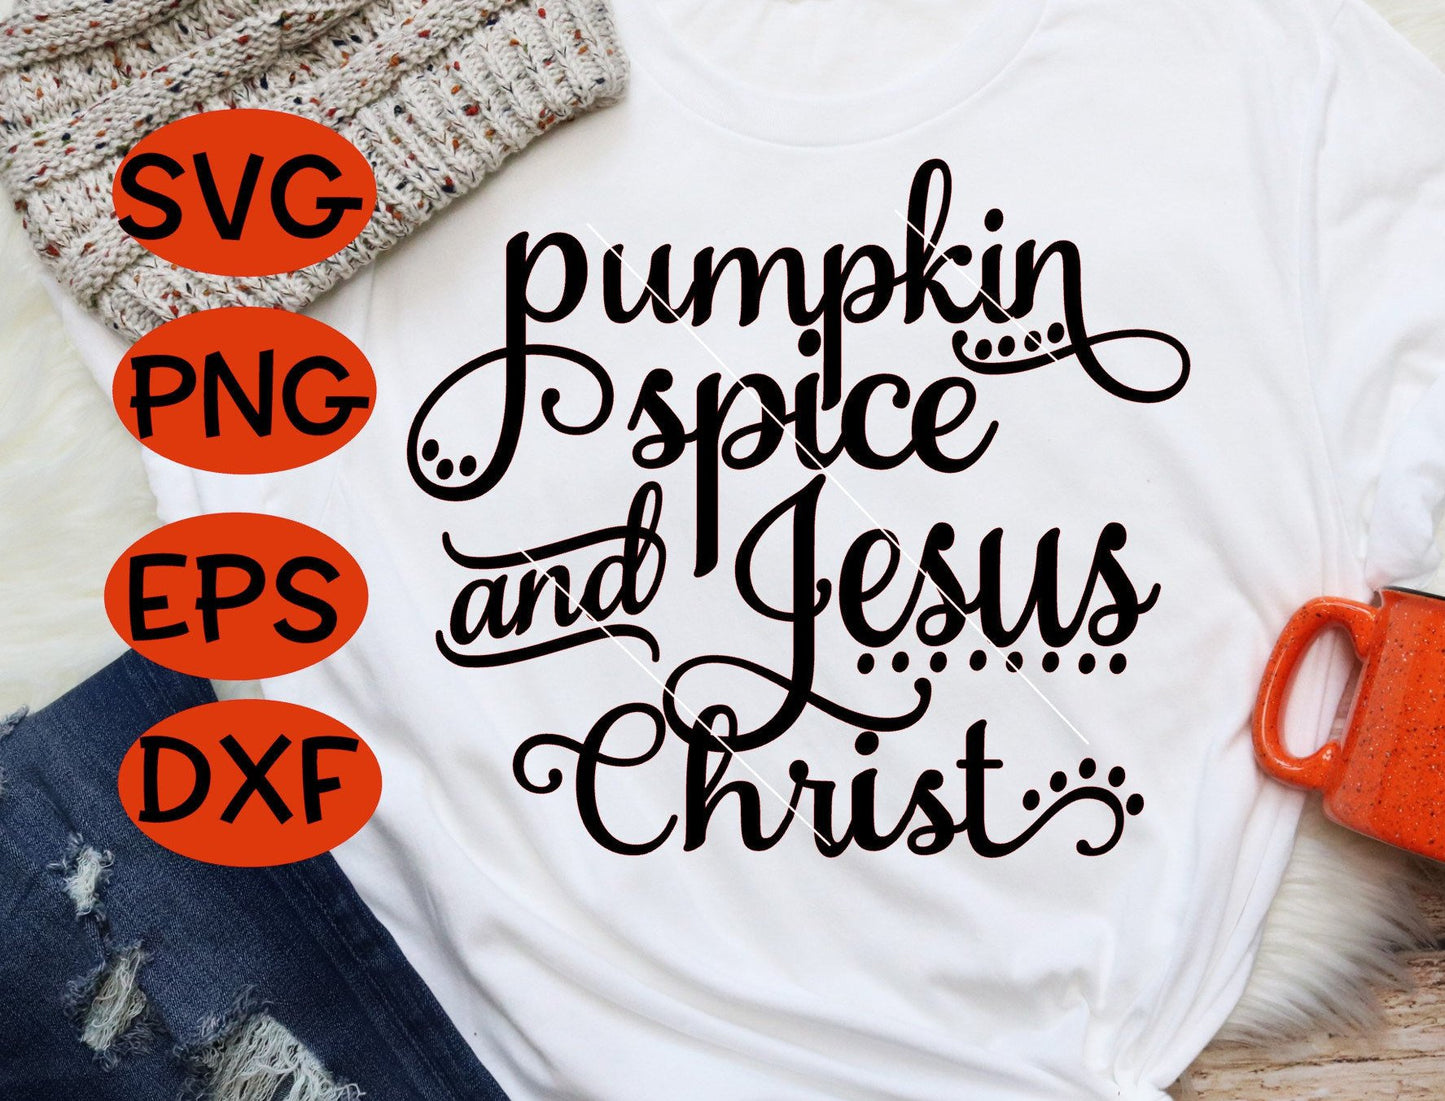 Pumpkin Spice SVG, Pumpkin Spice And Jesus Christ SVG, Fall Svg, Thanksgiving Svg, Silhouette Cut Files, cut file, cutting files, instant